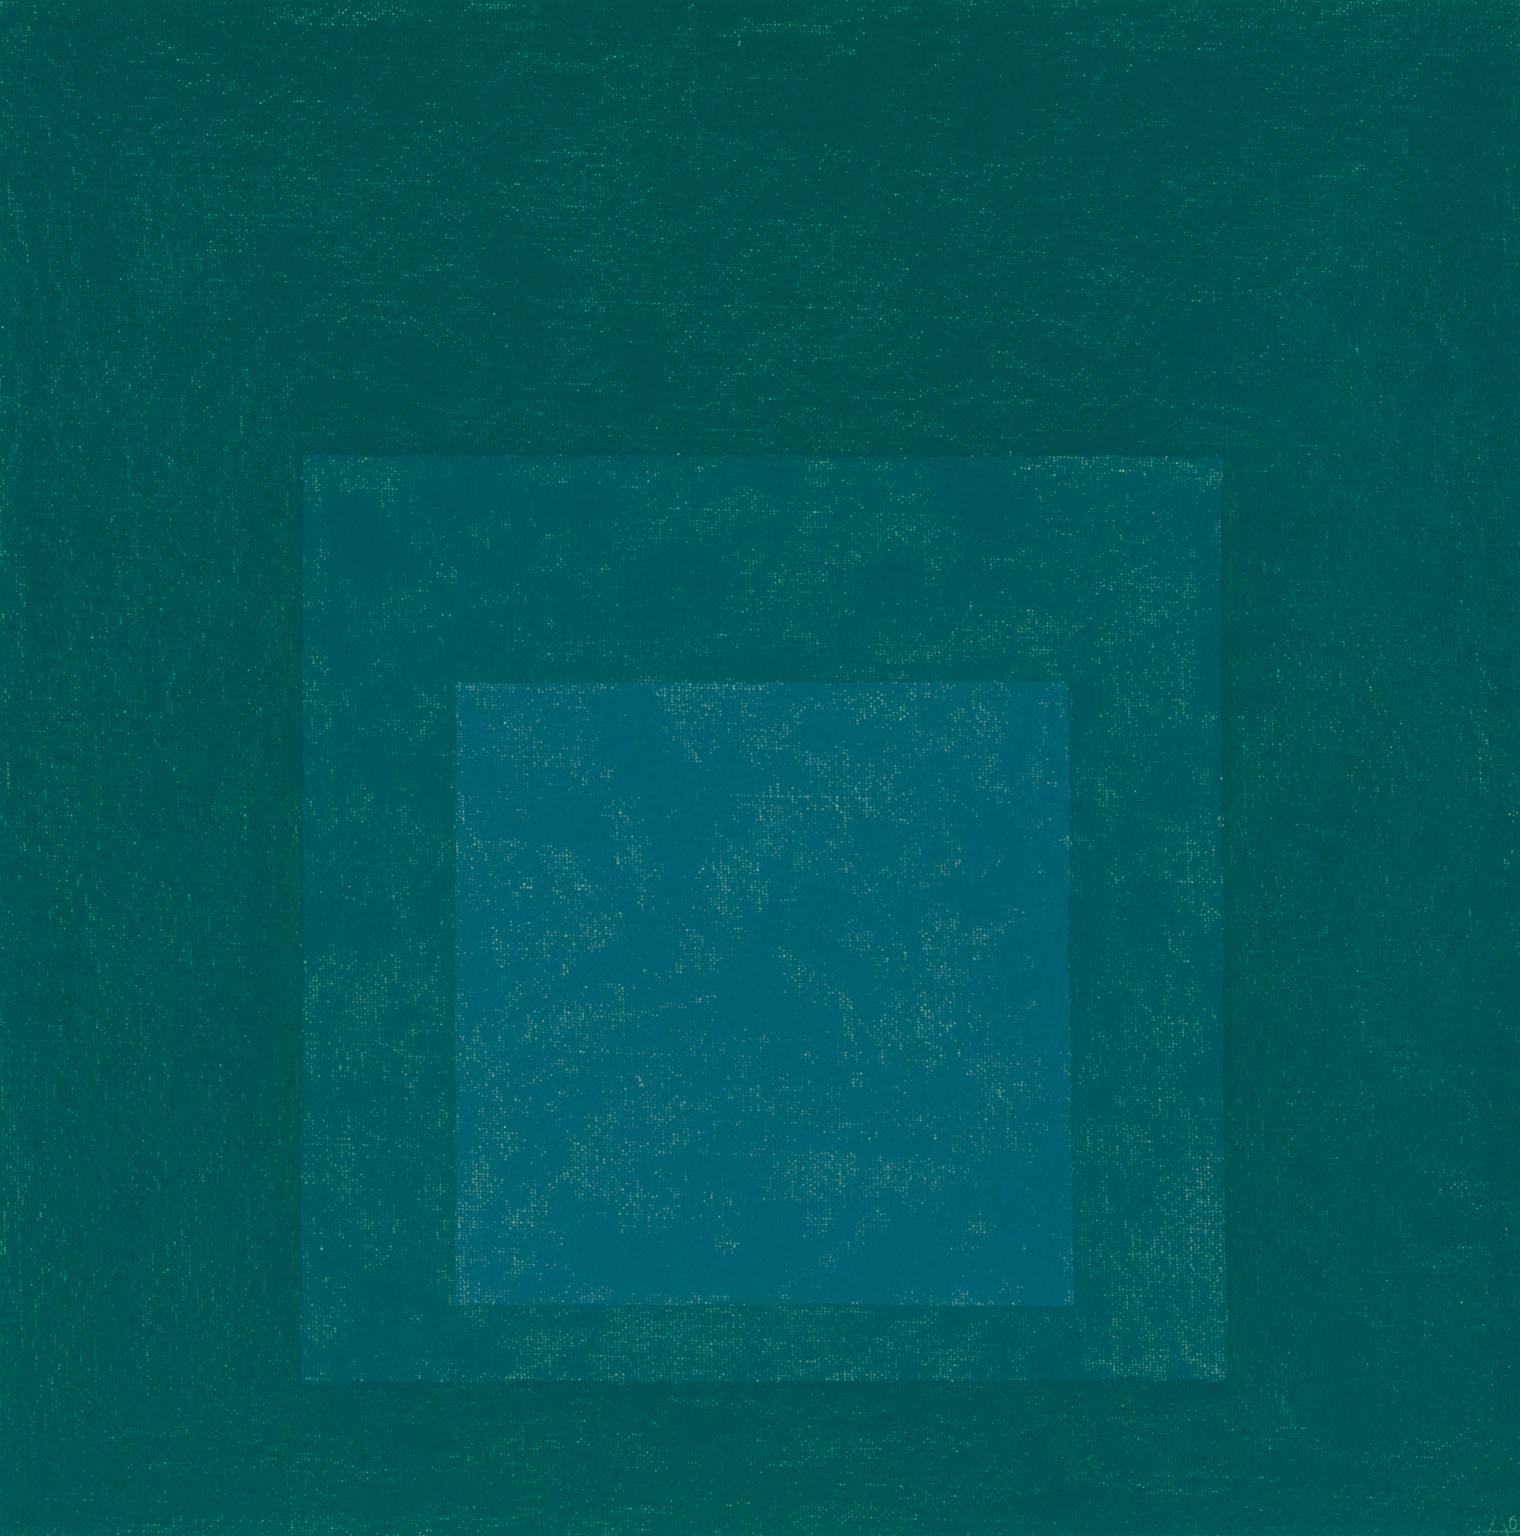 Study for Homage to the Square 1964 Josef Albers 1888-1976 Presented by Mrs Anni Albers, the artist's widow and the Josef Albers Foundation 1978